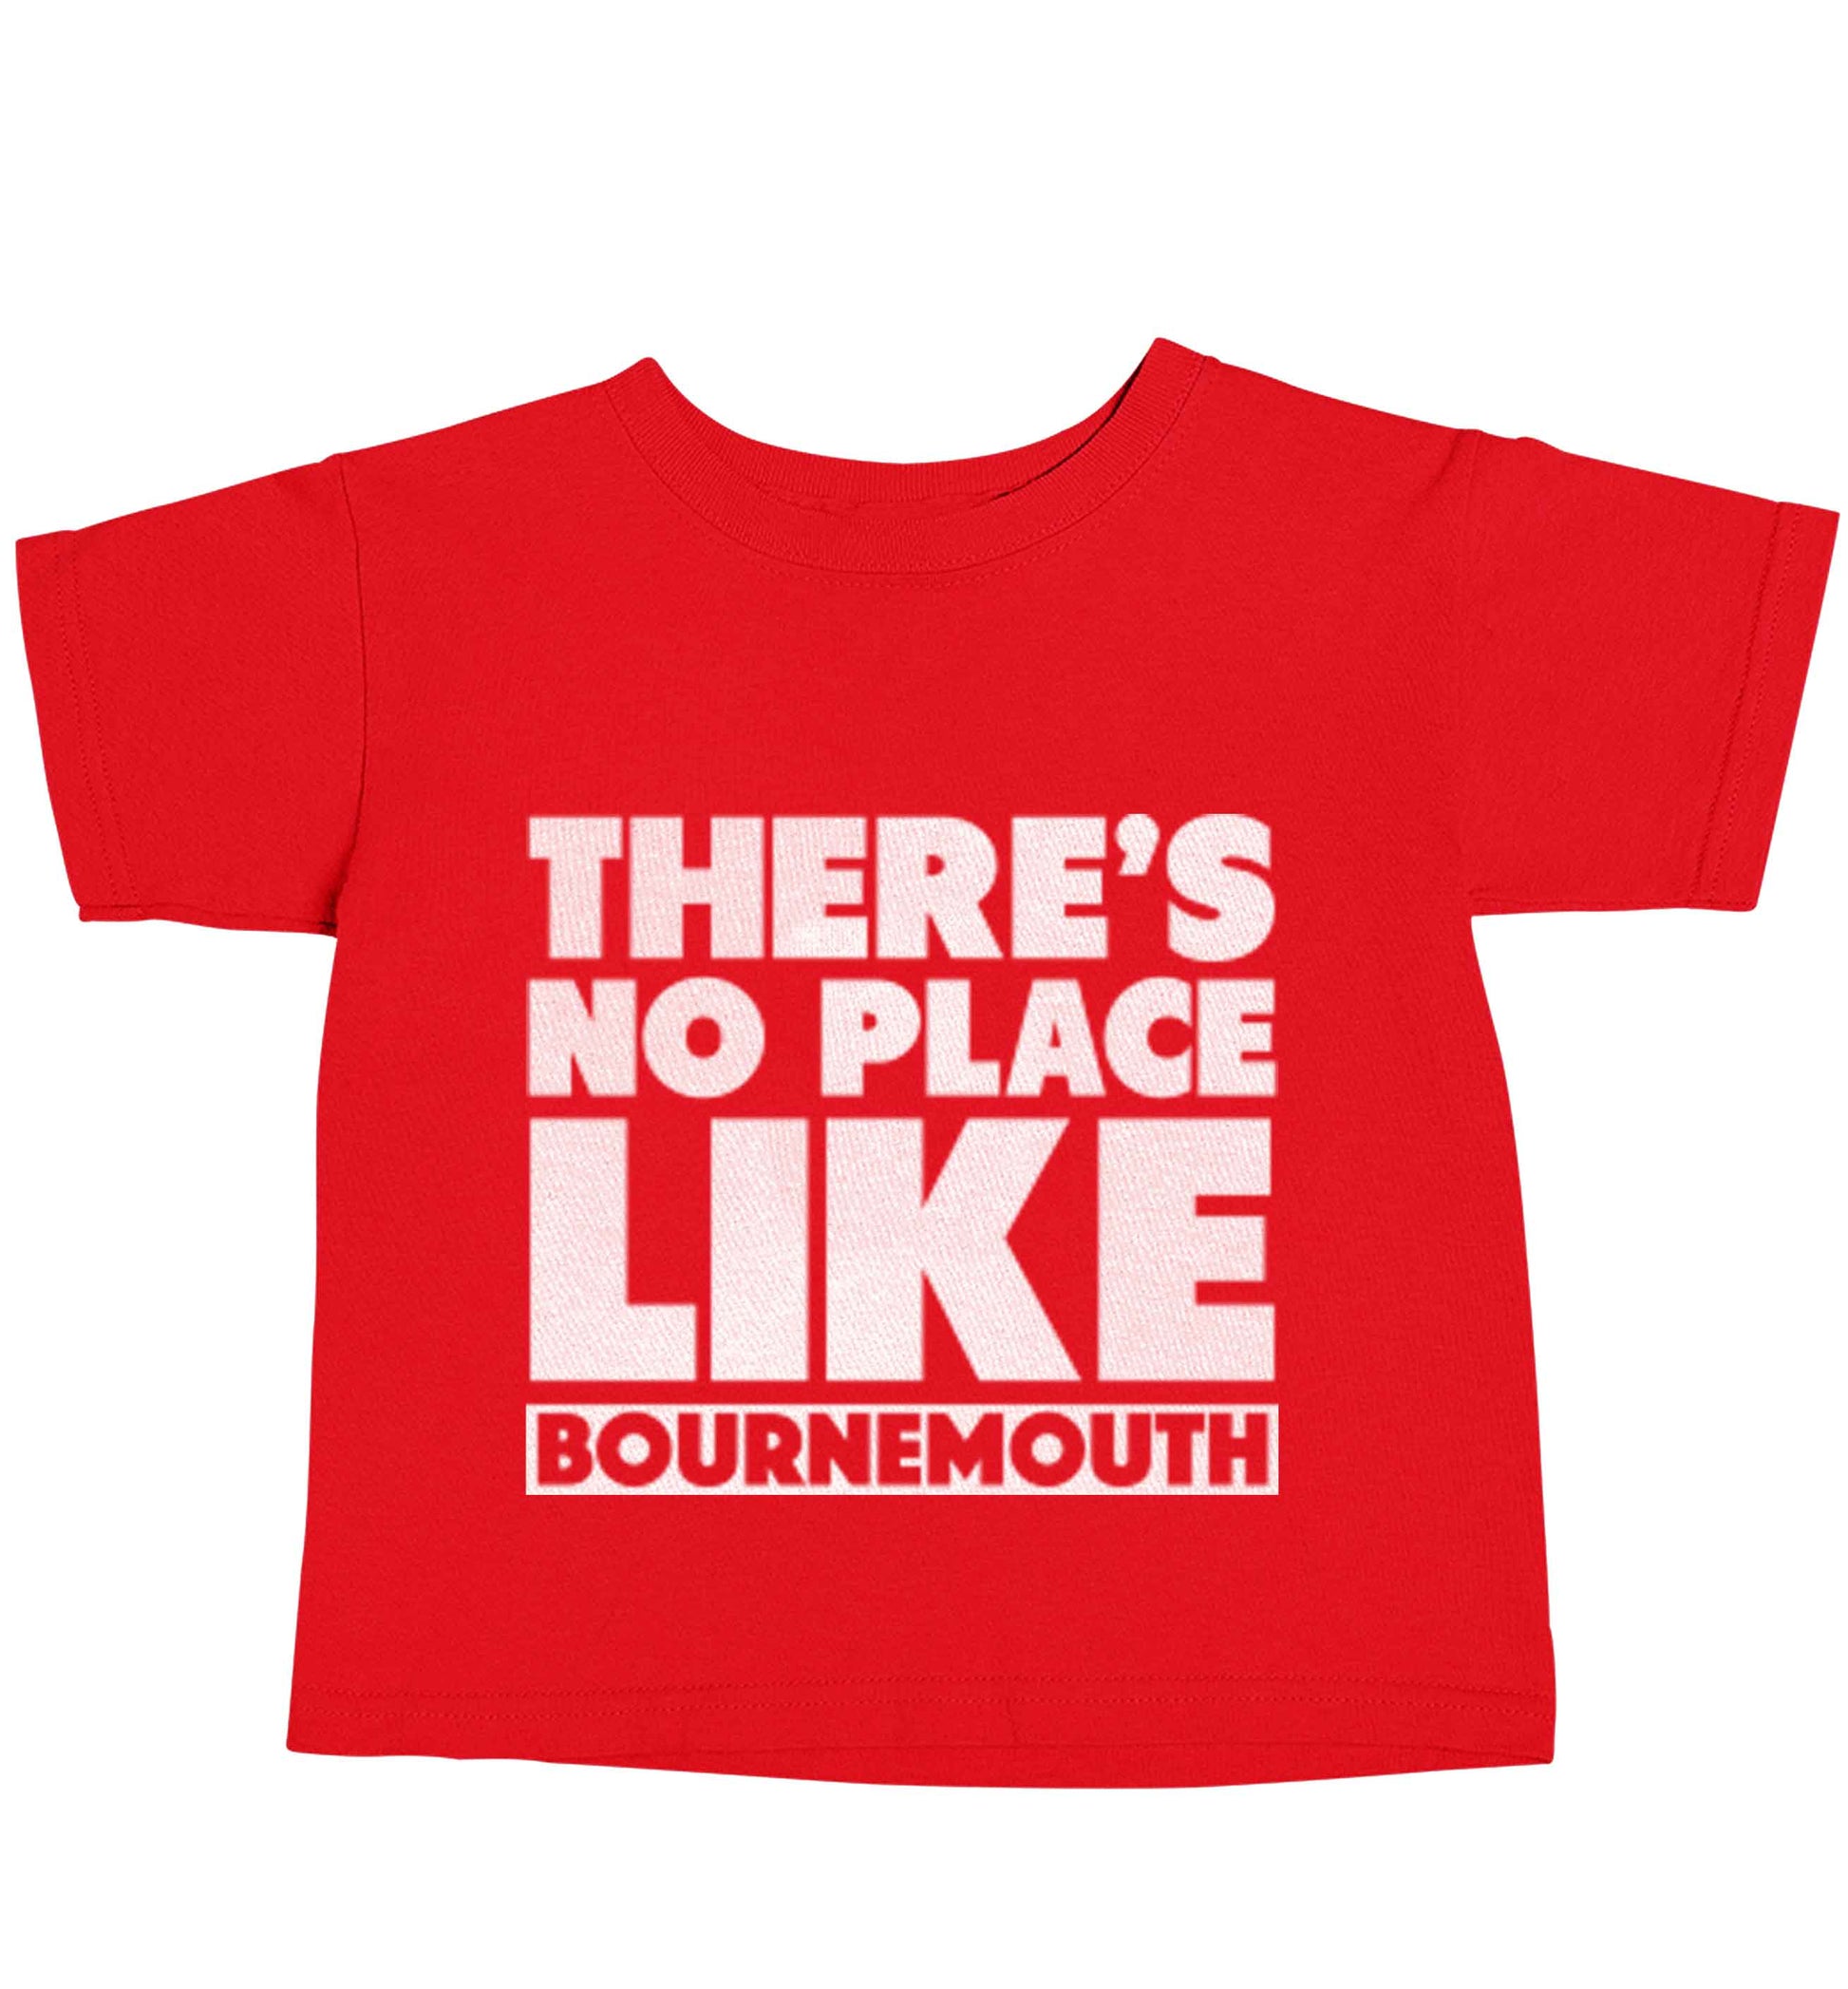 There's no place like Bournemouth red baby toddler Tshirt 2 Years